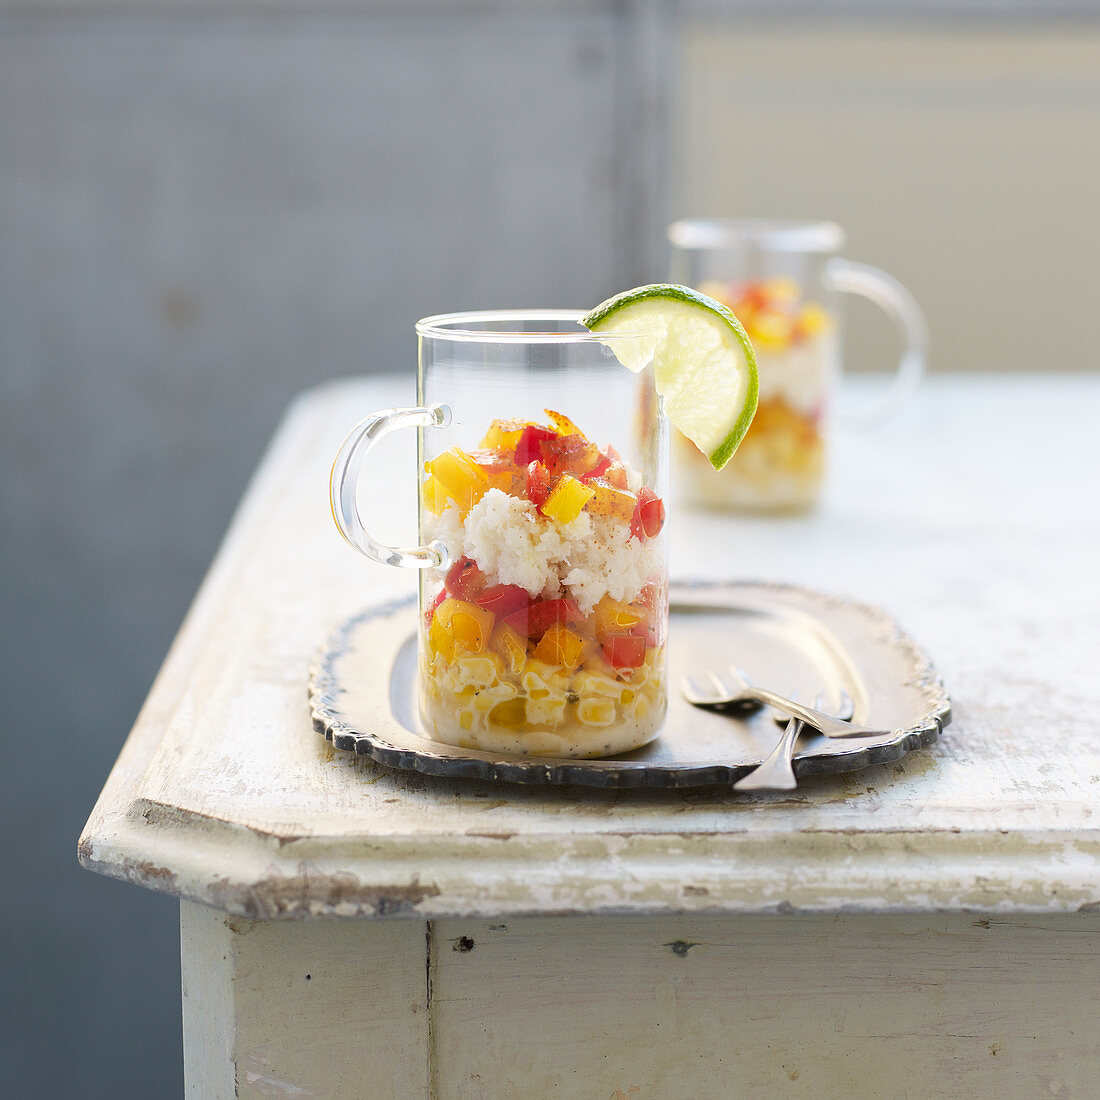 Corn salad with crab meat and peppers in glass cups